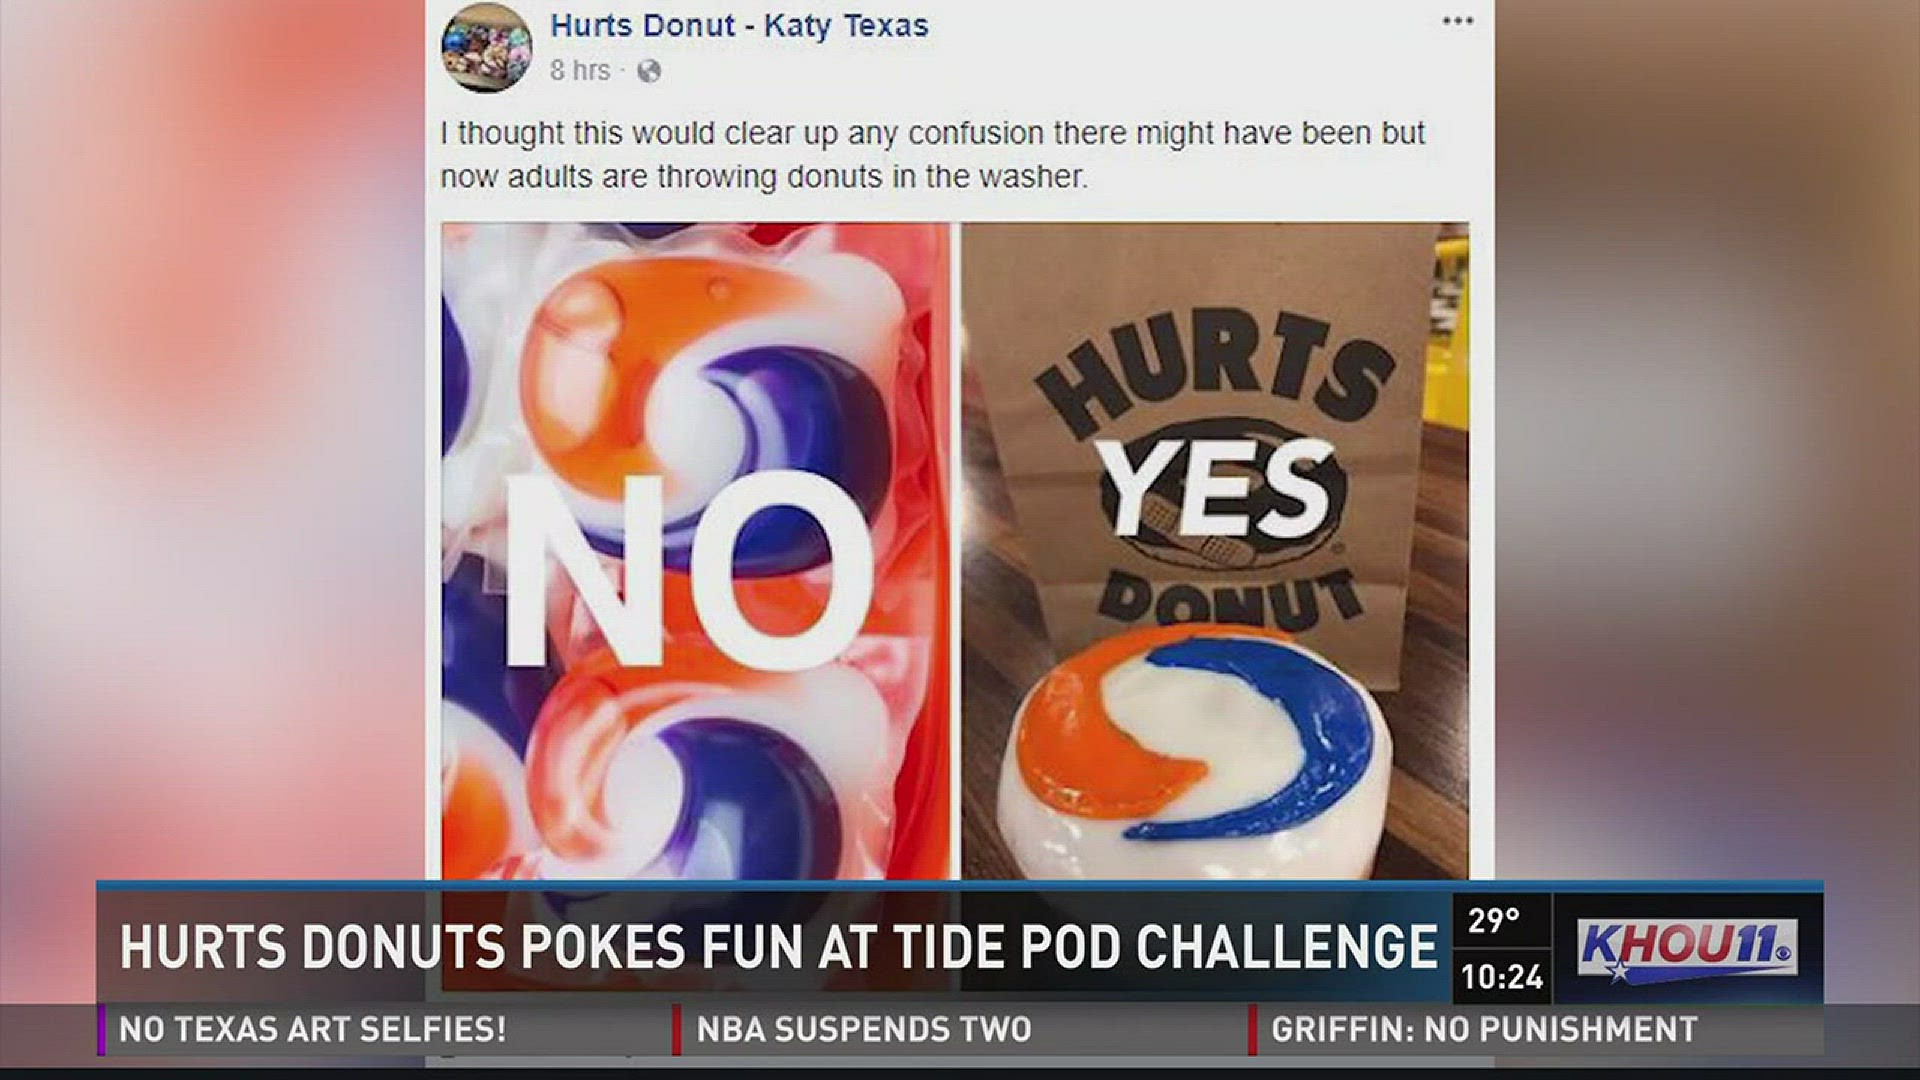 Hurts Donuts offers a sweet alternative to the Tide Pods challenge.